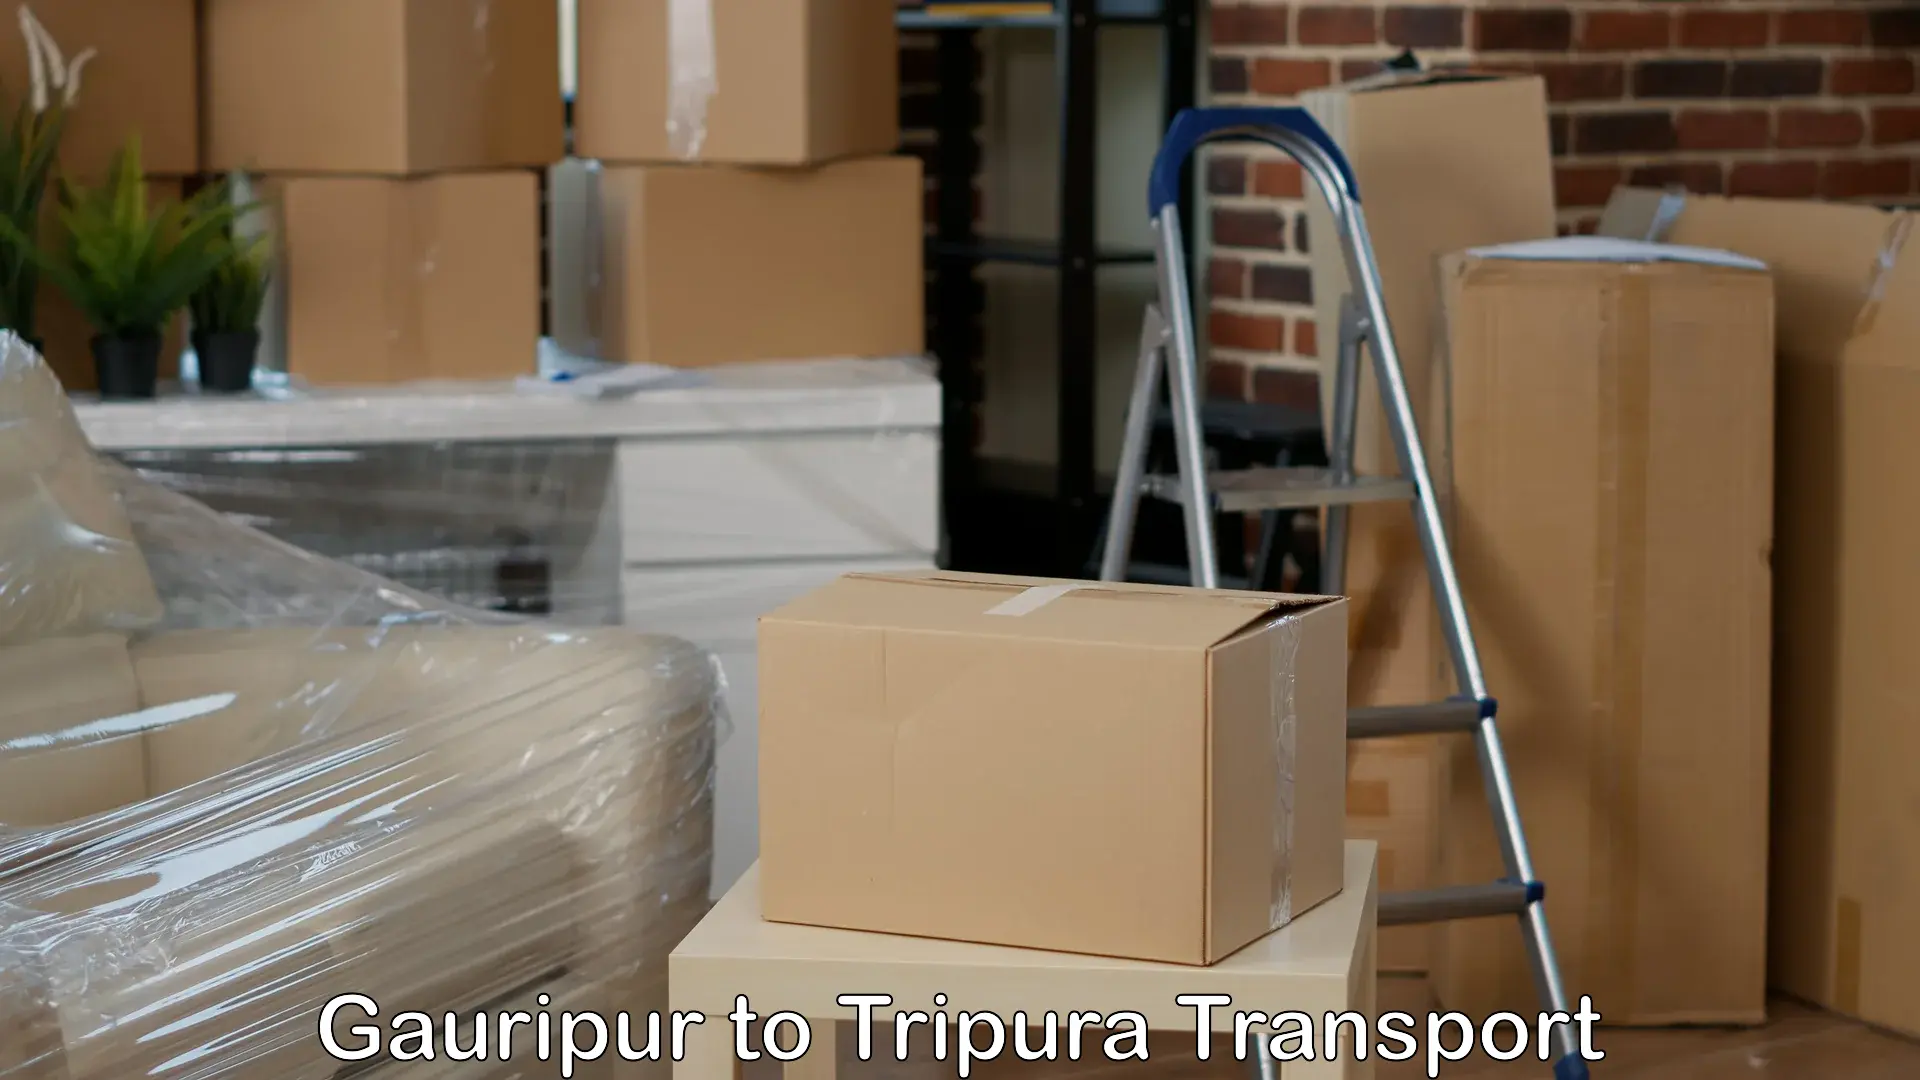 Daily parcel service transport Gauripur to Udaipur Tripura